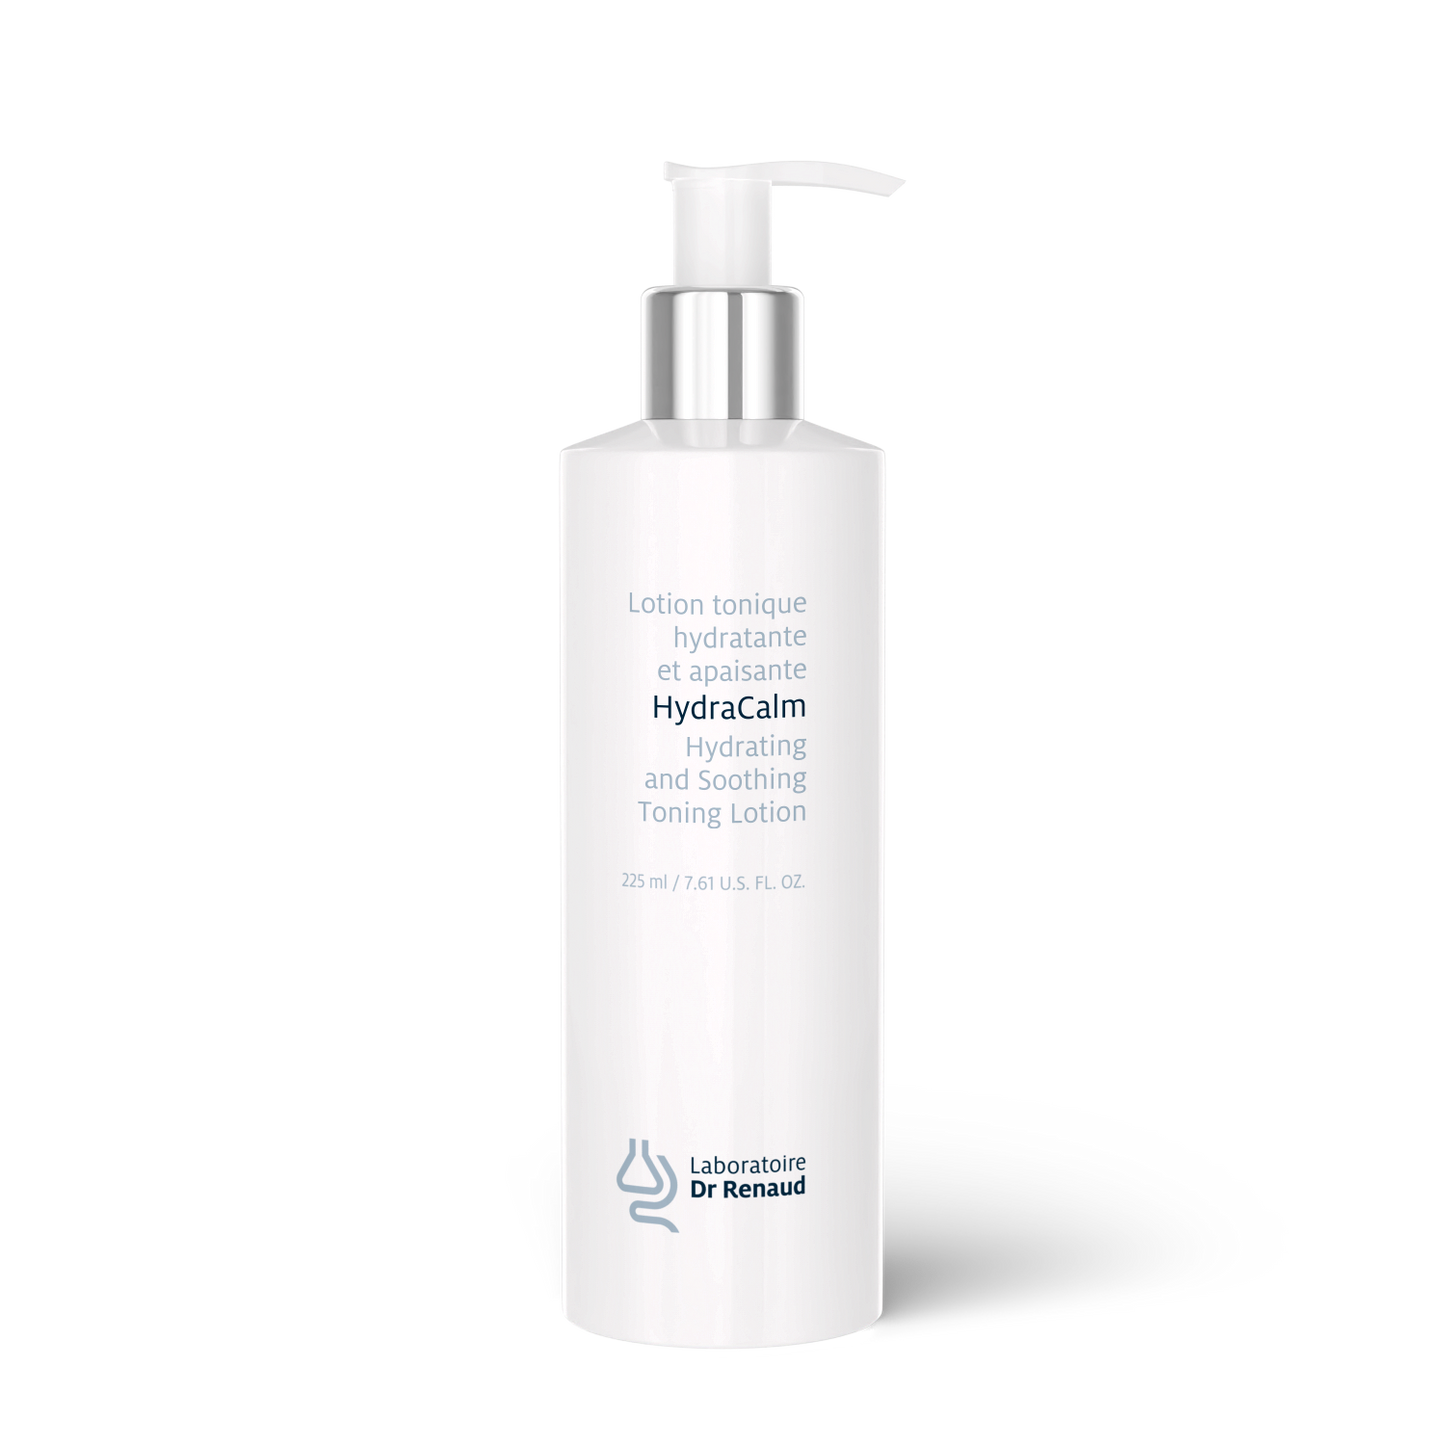 Load image into Gallery viewer, Laboratoire Dr Renaud – HydraCalm – Hydrating and Soothing Toning Lotion
